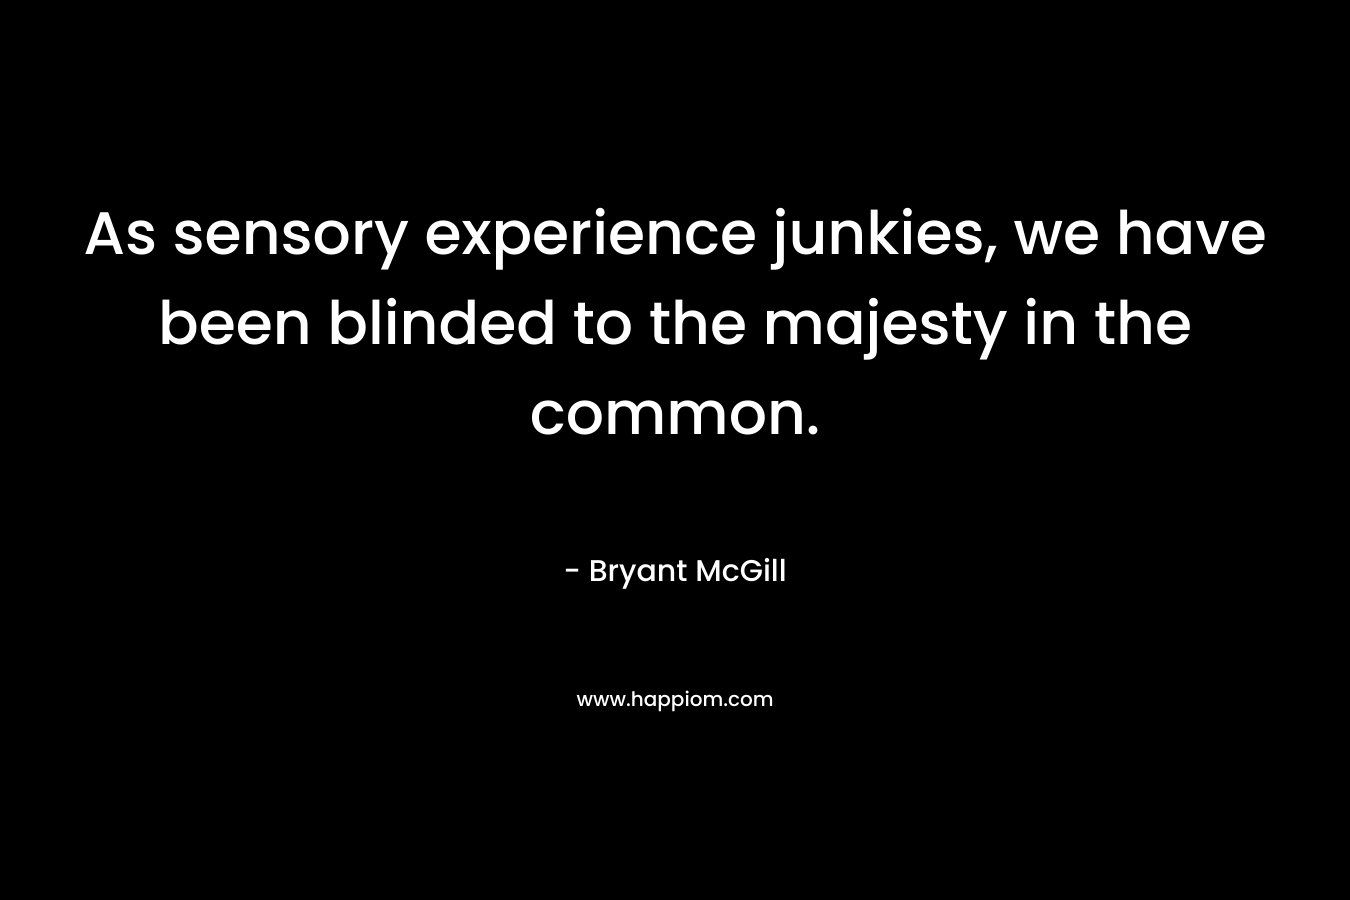 As sensory experience junkies, we have been blinded to the majesty in the common.